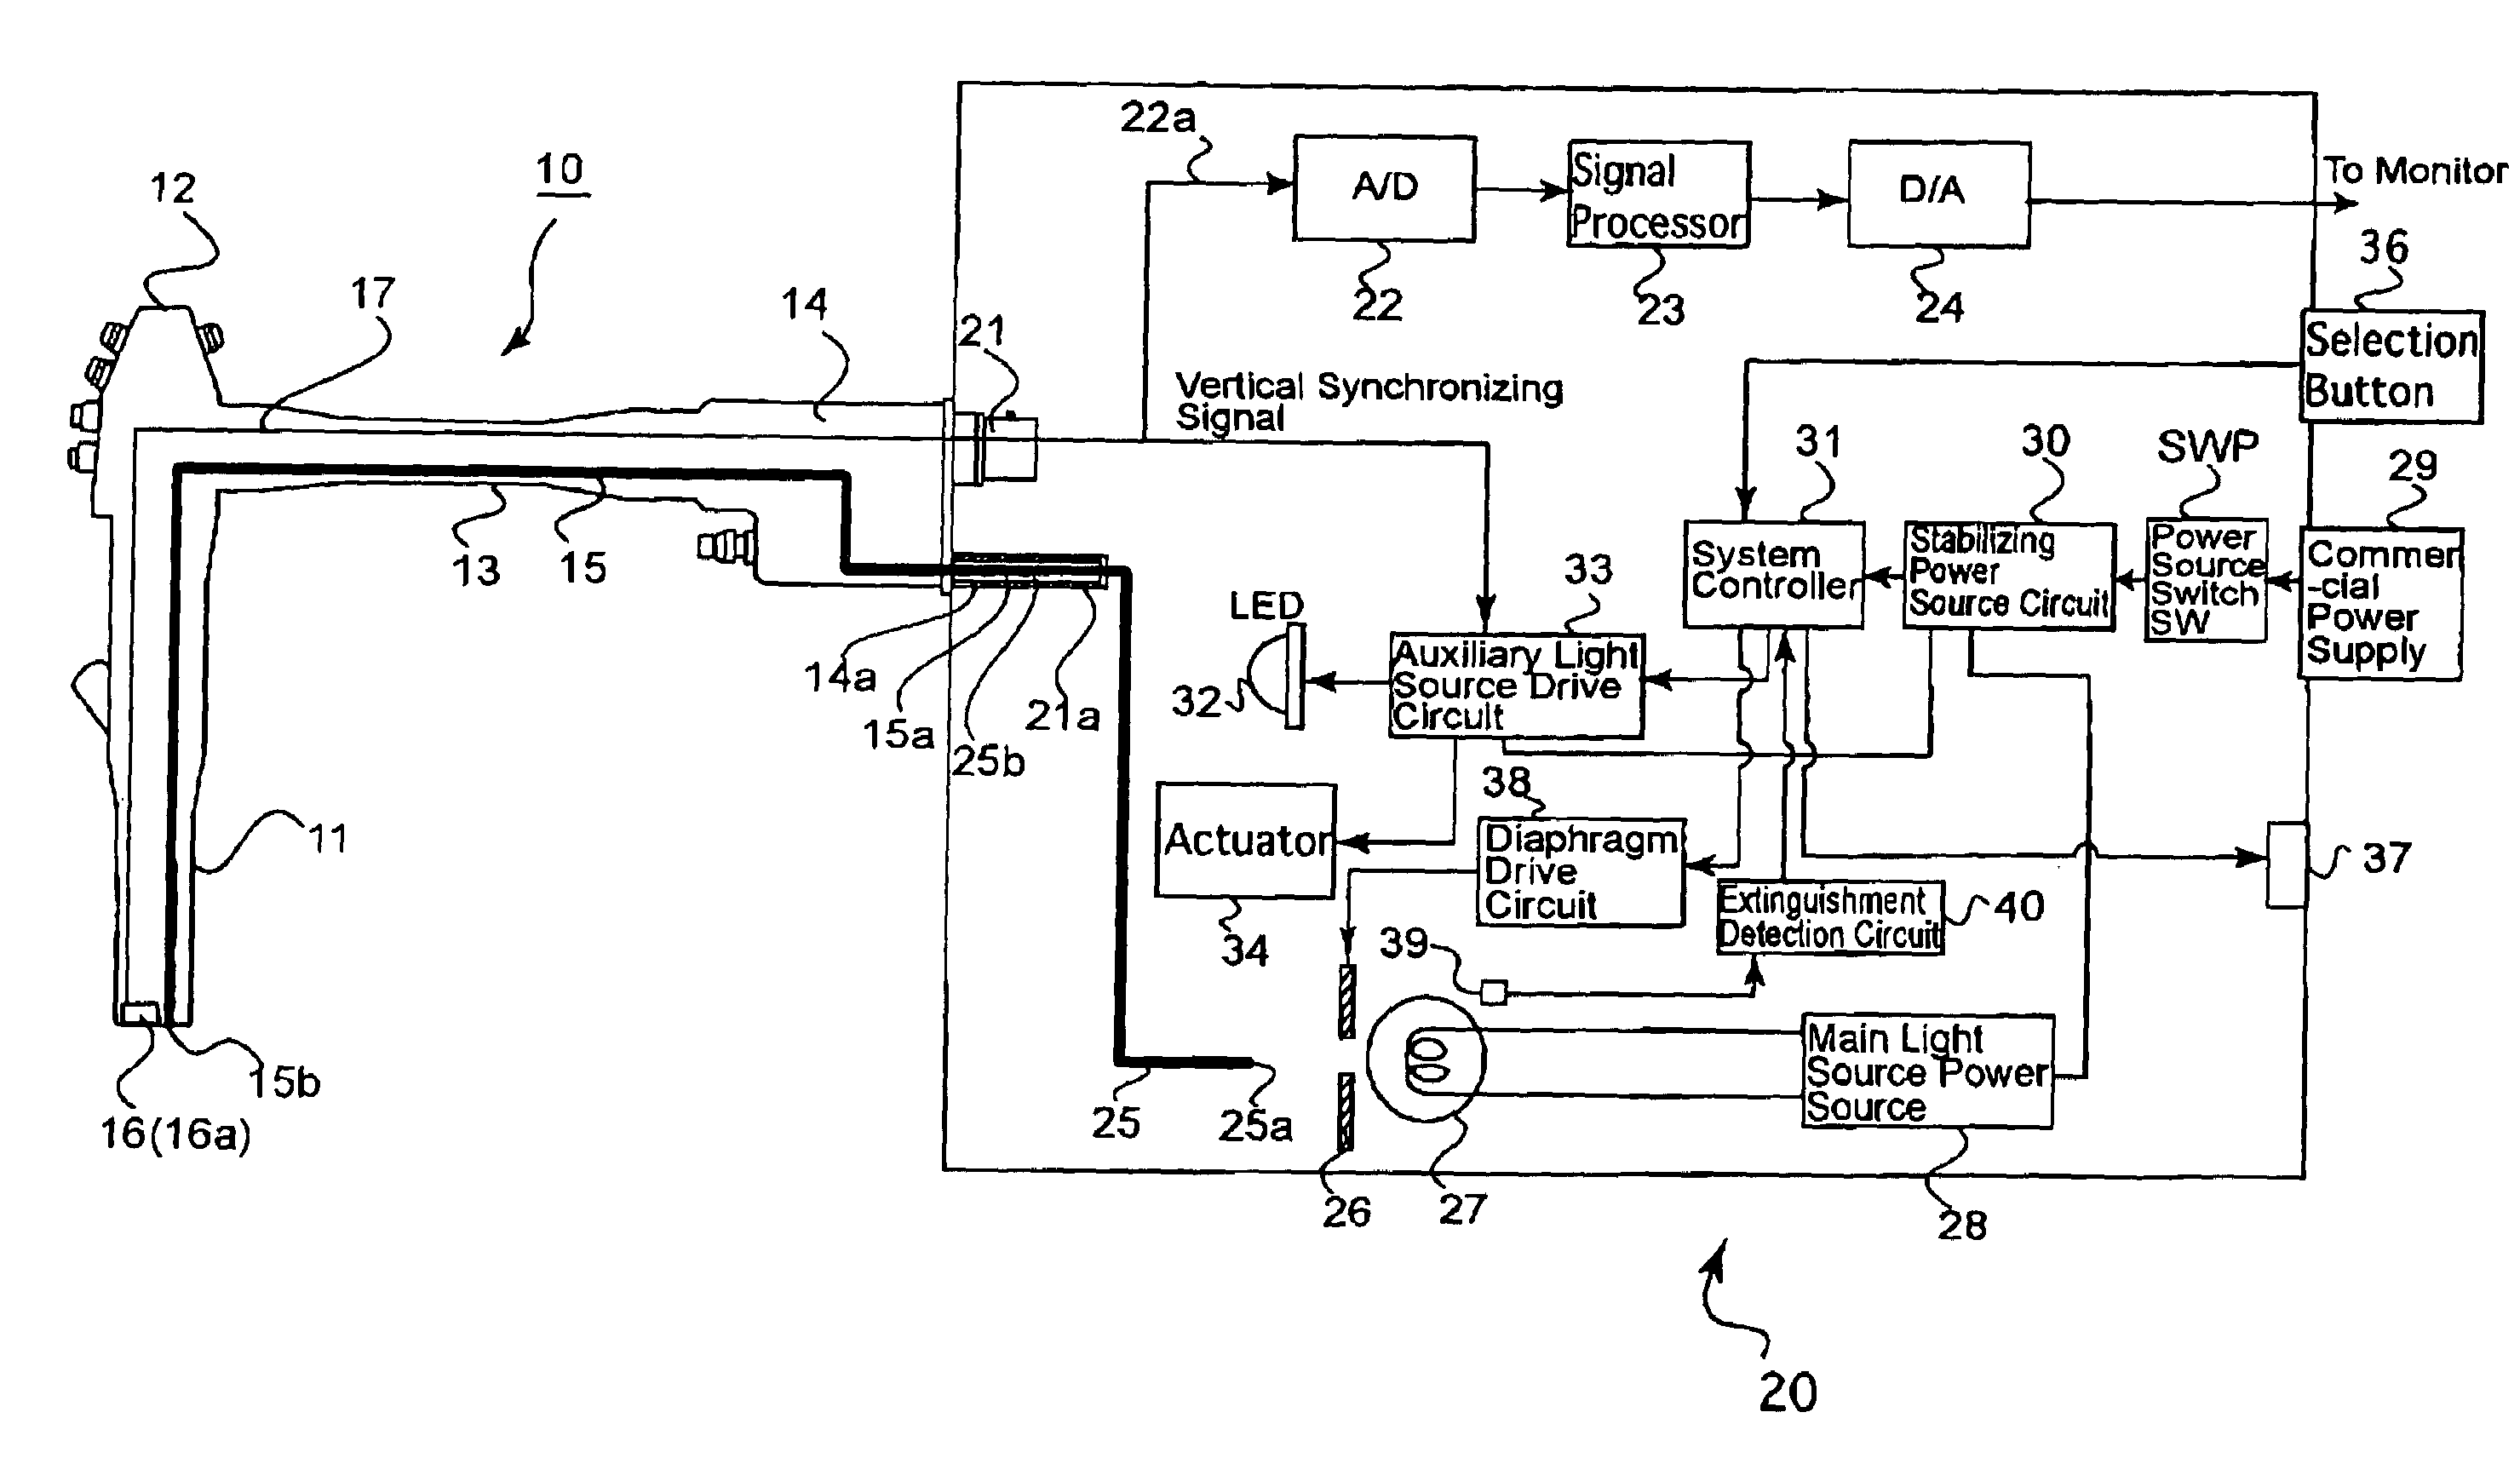 Light source apparatus for endoscope